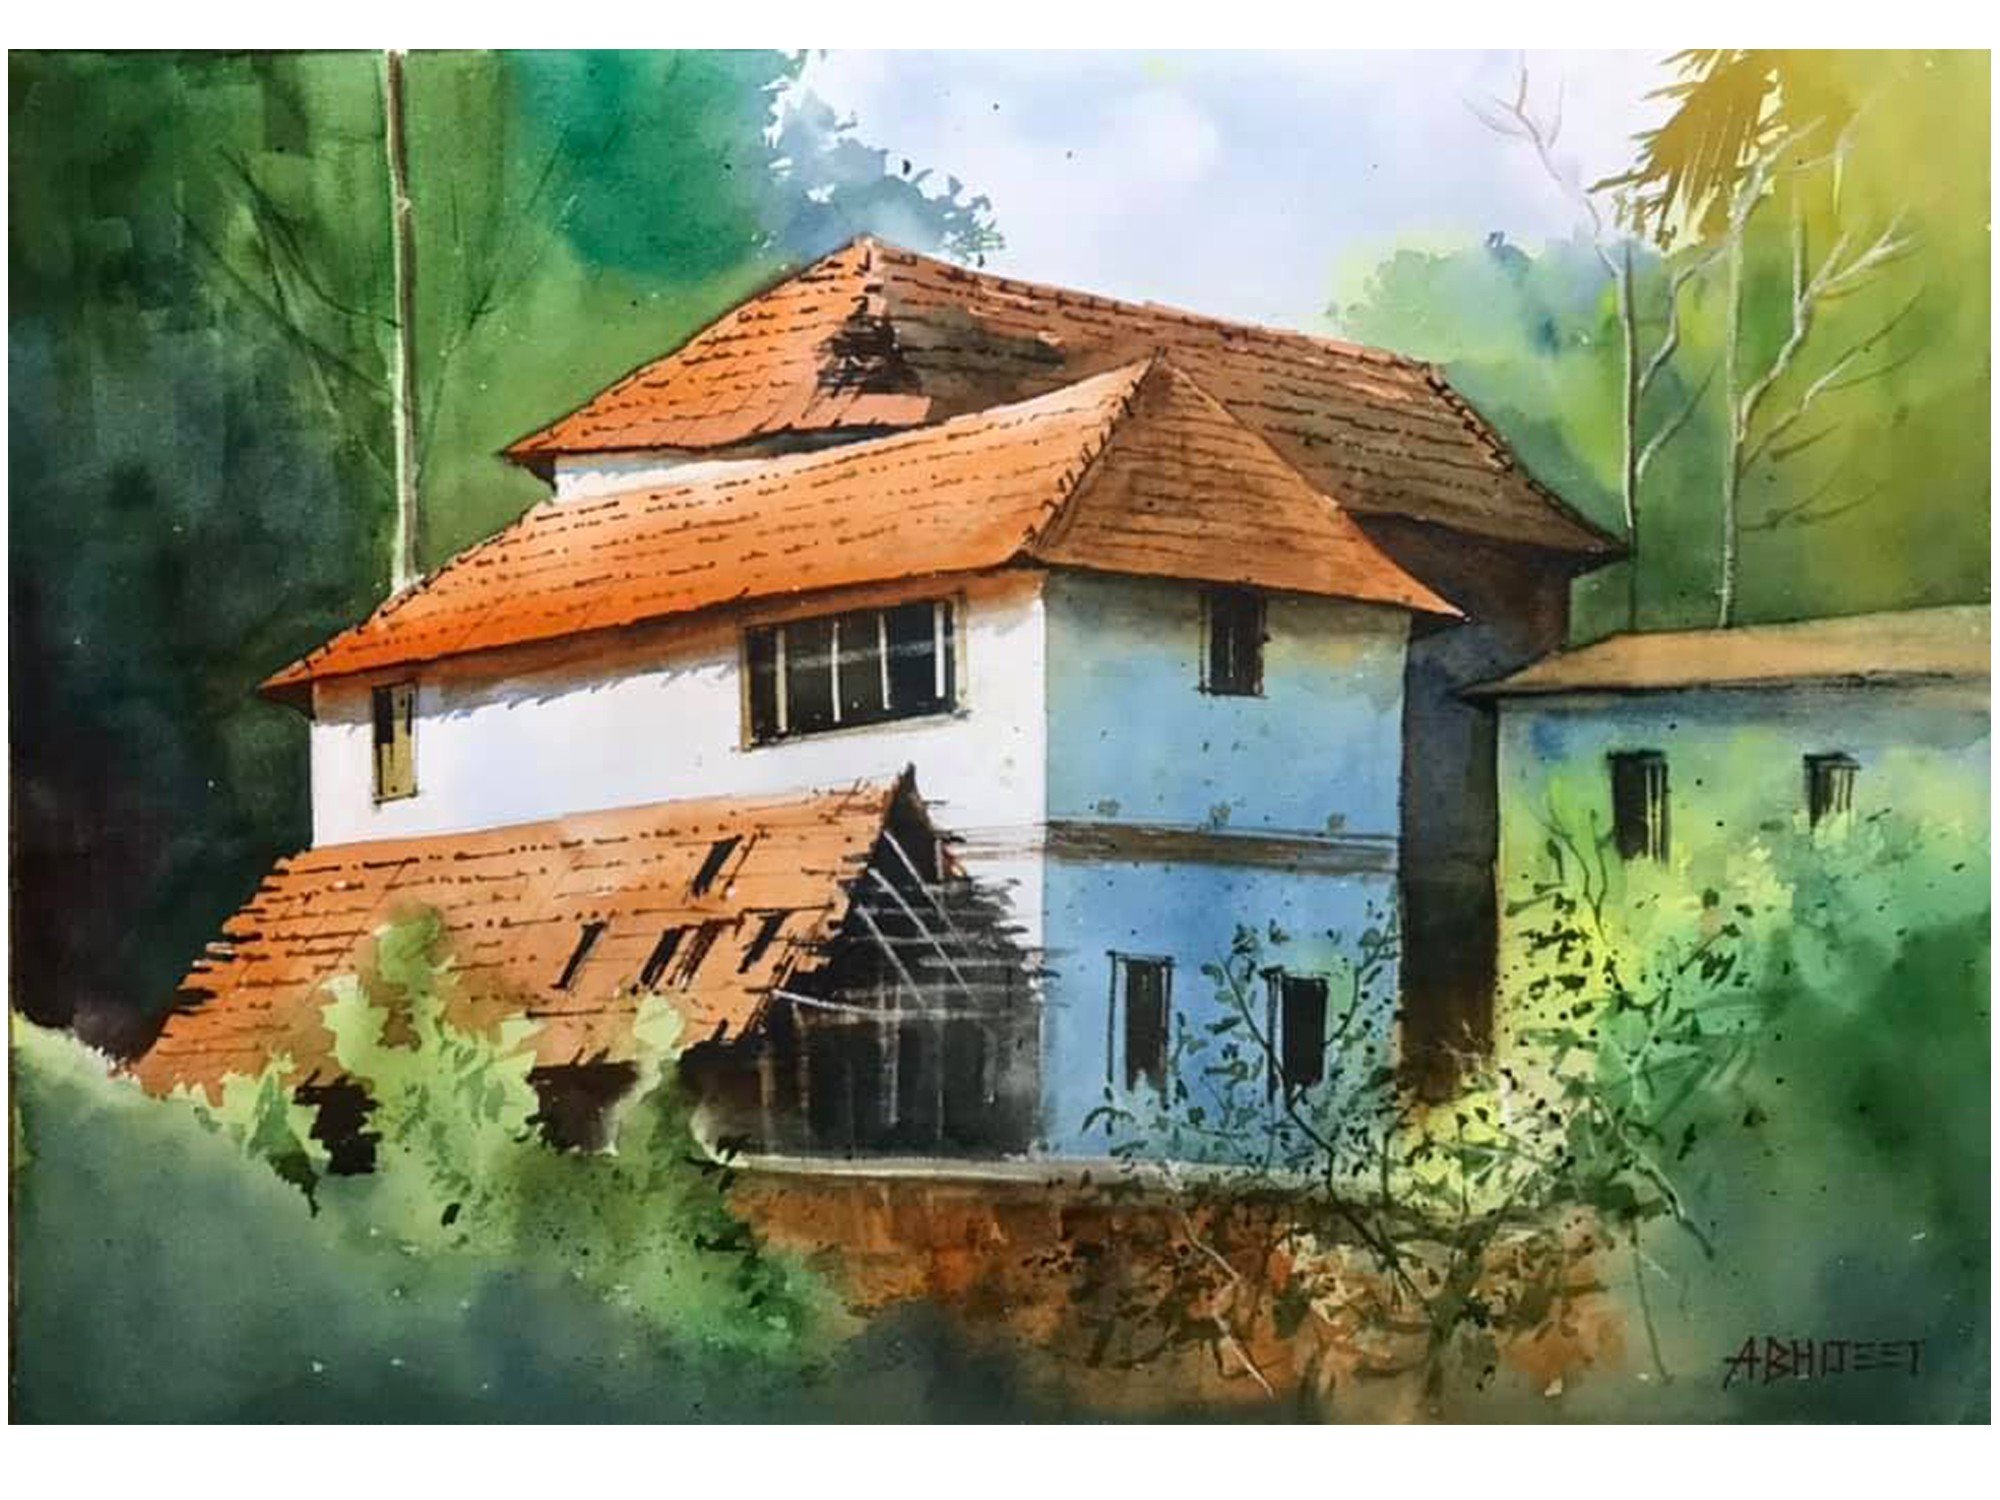 Buy Rural India Landscape Original Watercolor Painting Indian Countryside  Village Landscape Gallery Wall Art Scenery Home Decor Boho Wall Art Online  in India - Etsy